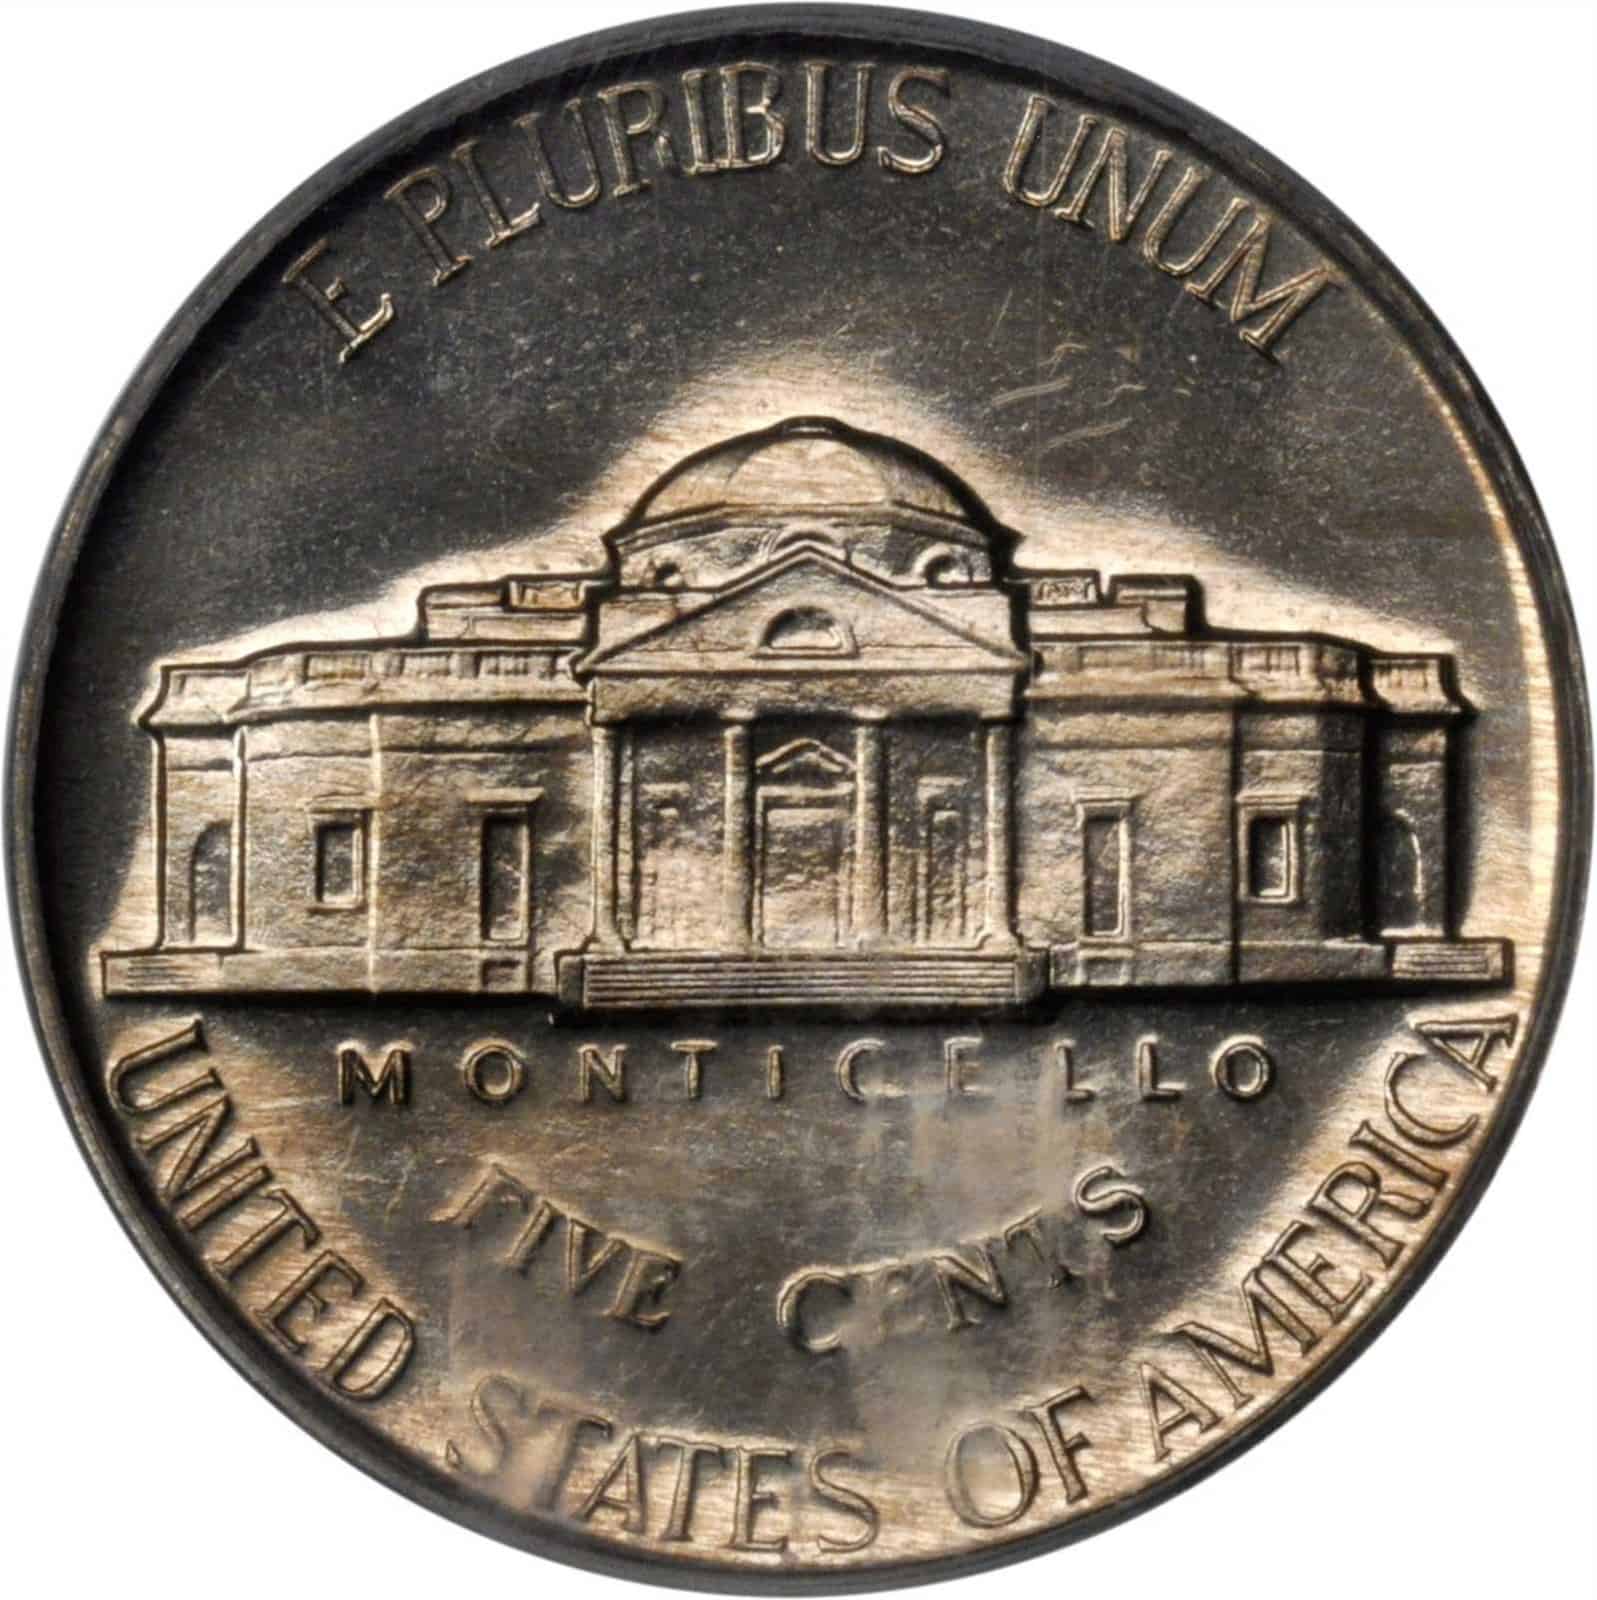 The reverse of the 1941 Jefferson nickel